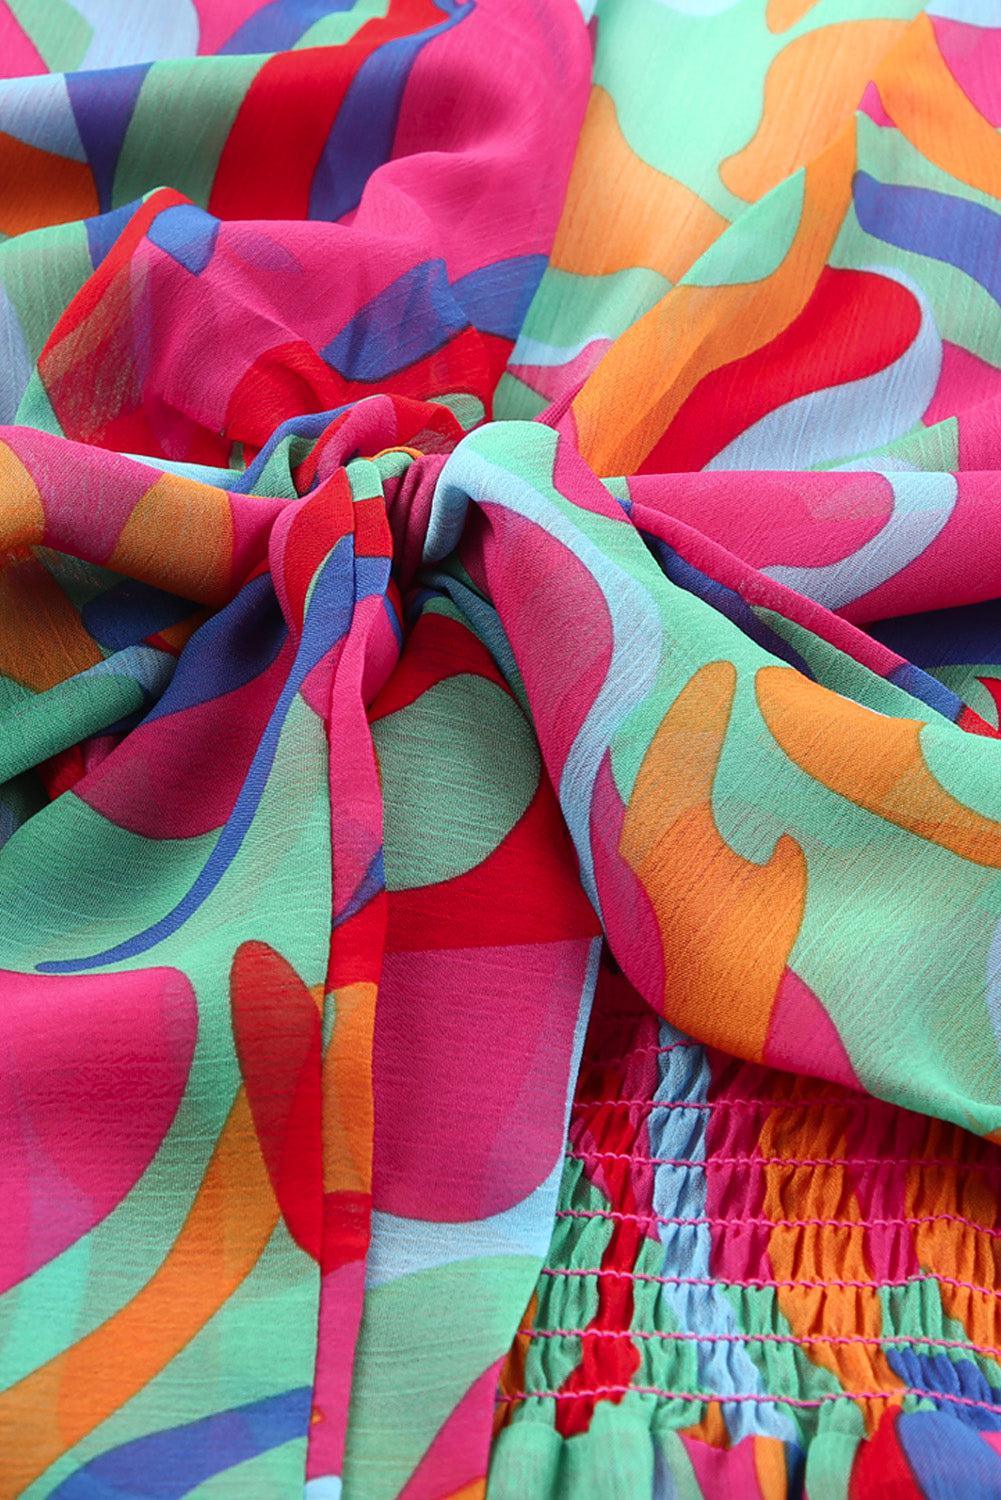 a close up of a colorful cloth with a tie